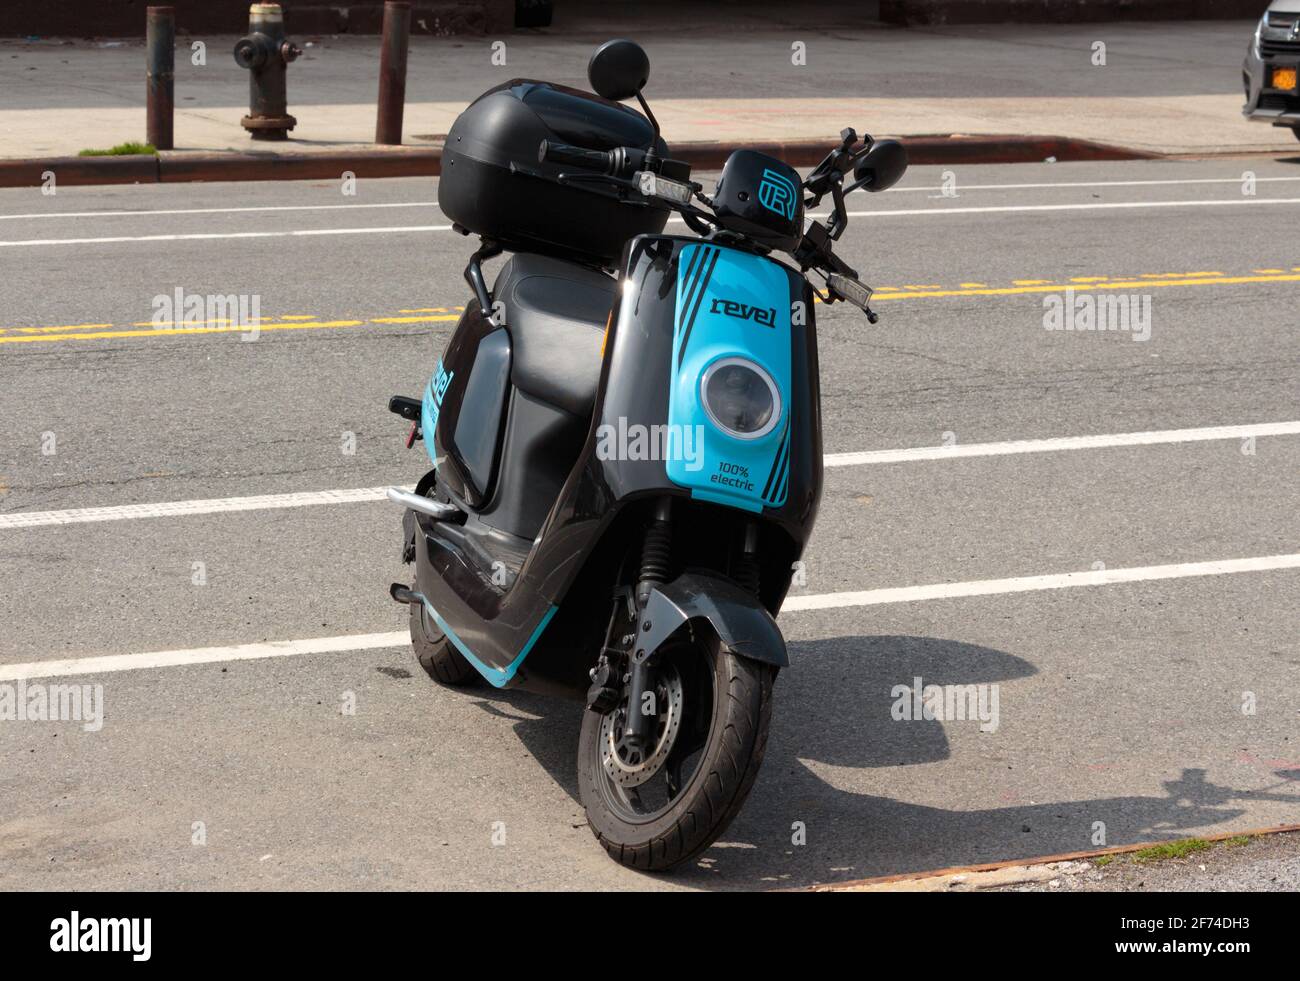 A Revel brand electric moped parked on a New York street, a electric bike and moped rental company for urban transportation Stock Photo